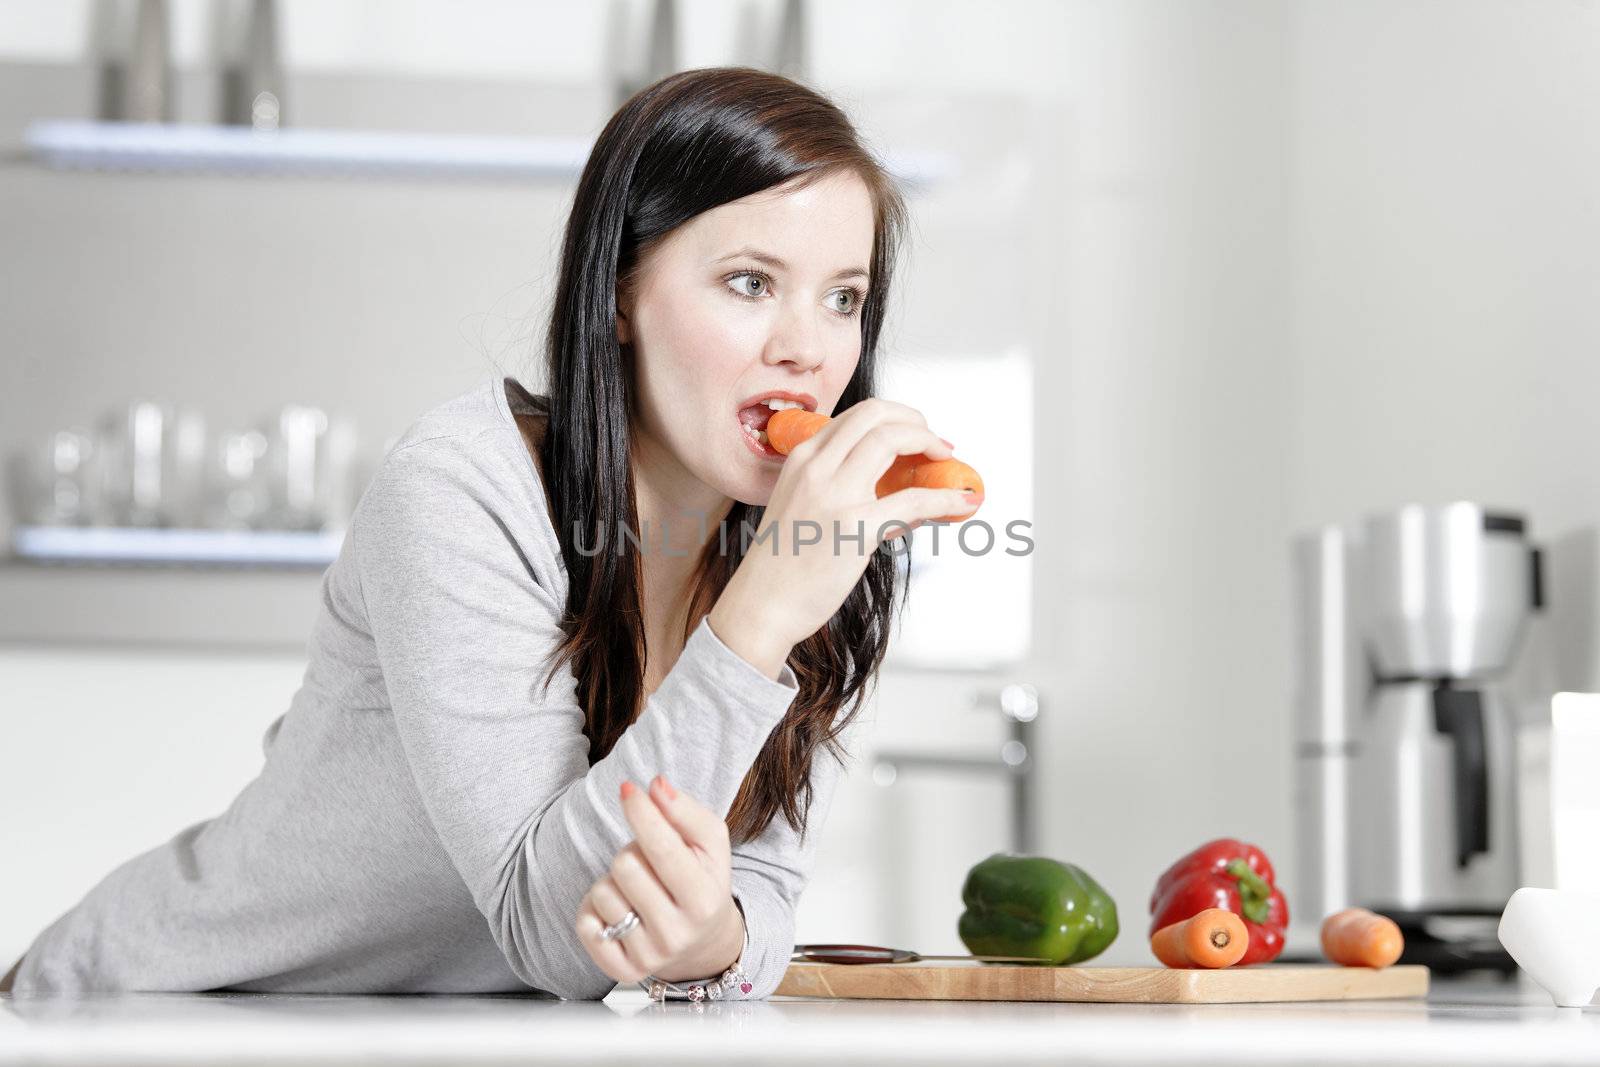 Attractive young woman in her elegant kitchen eating a raw carrot.